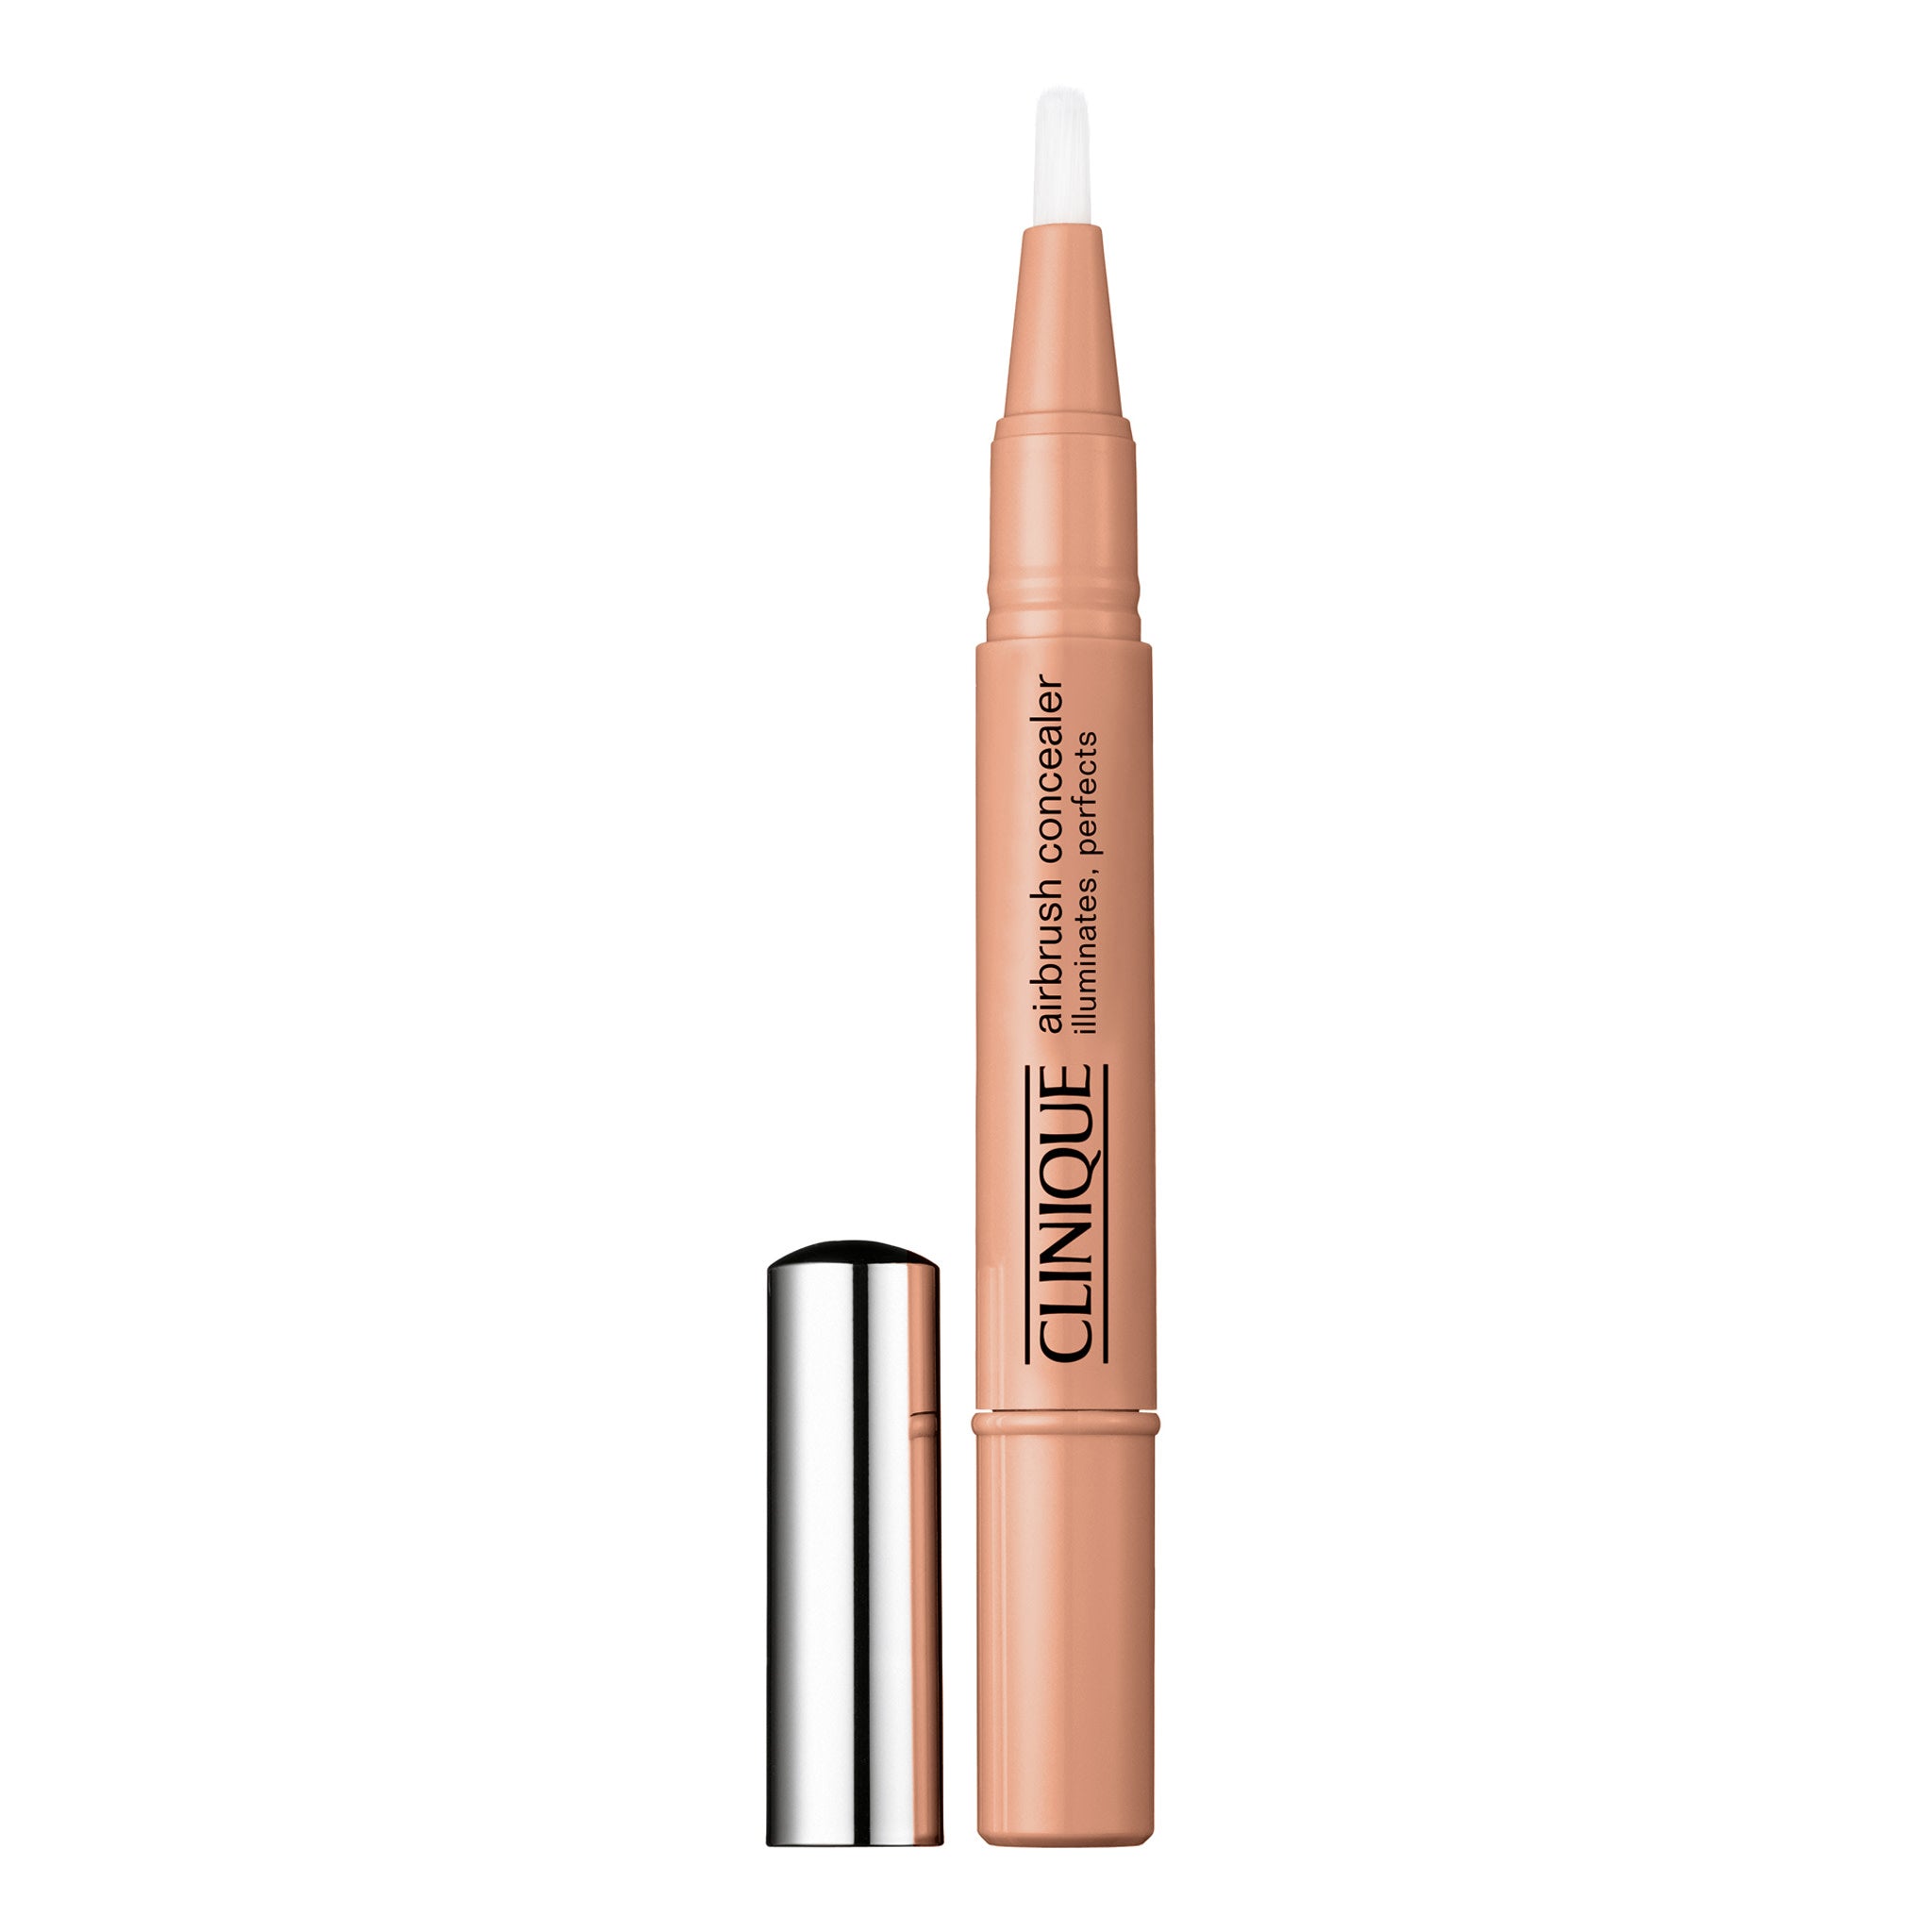 Clinique Airbrush Concealer Color/Shade variant: Light Honey main image.